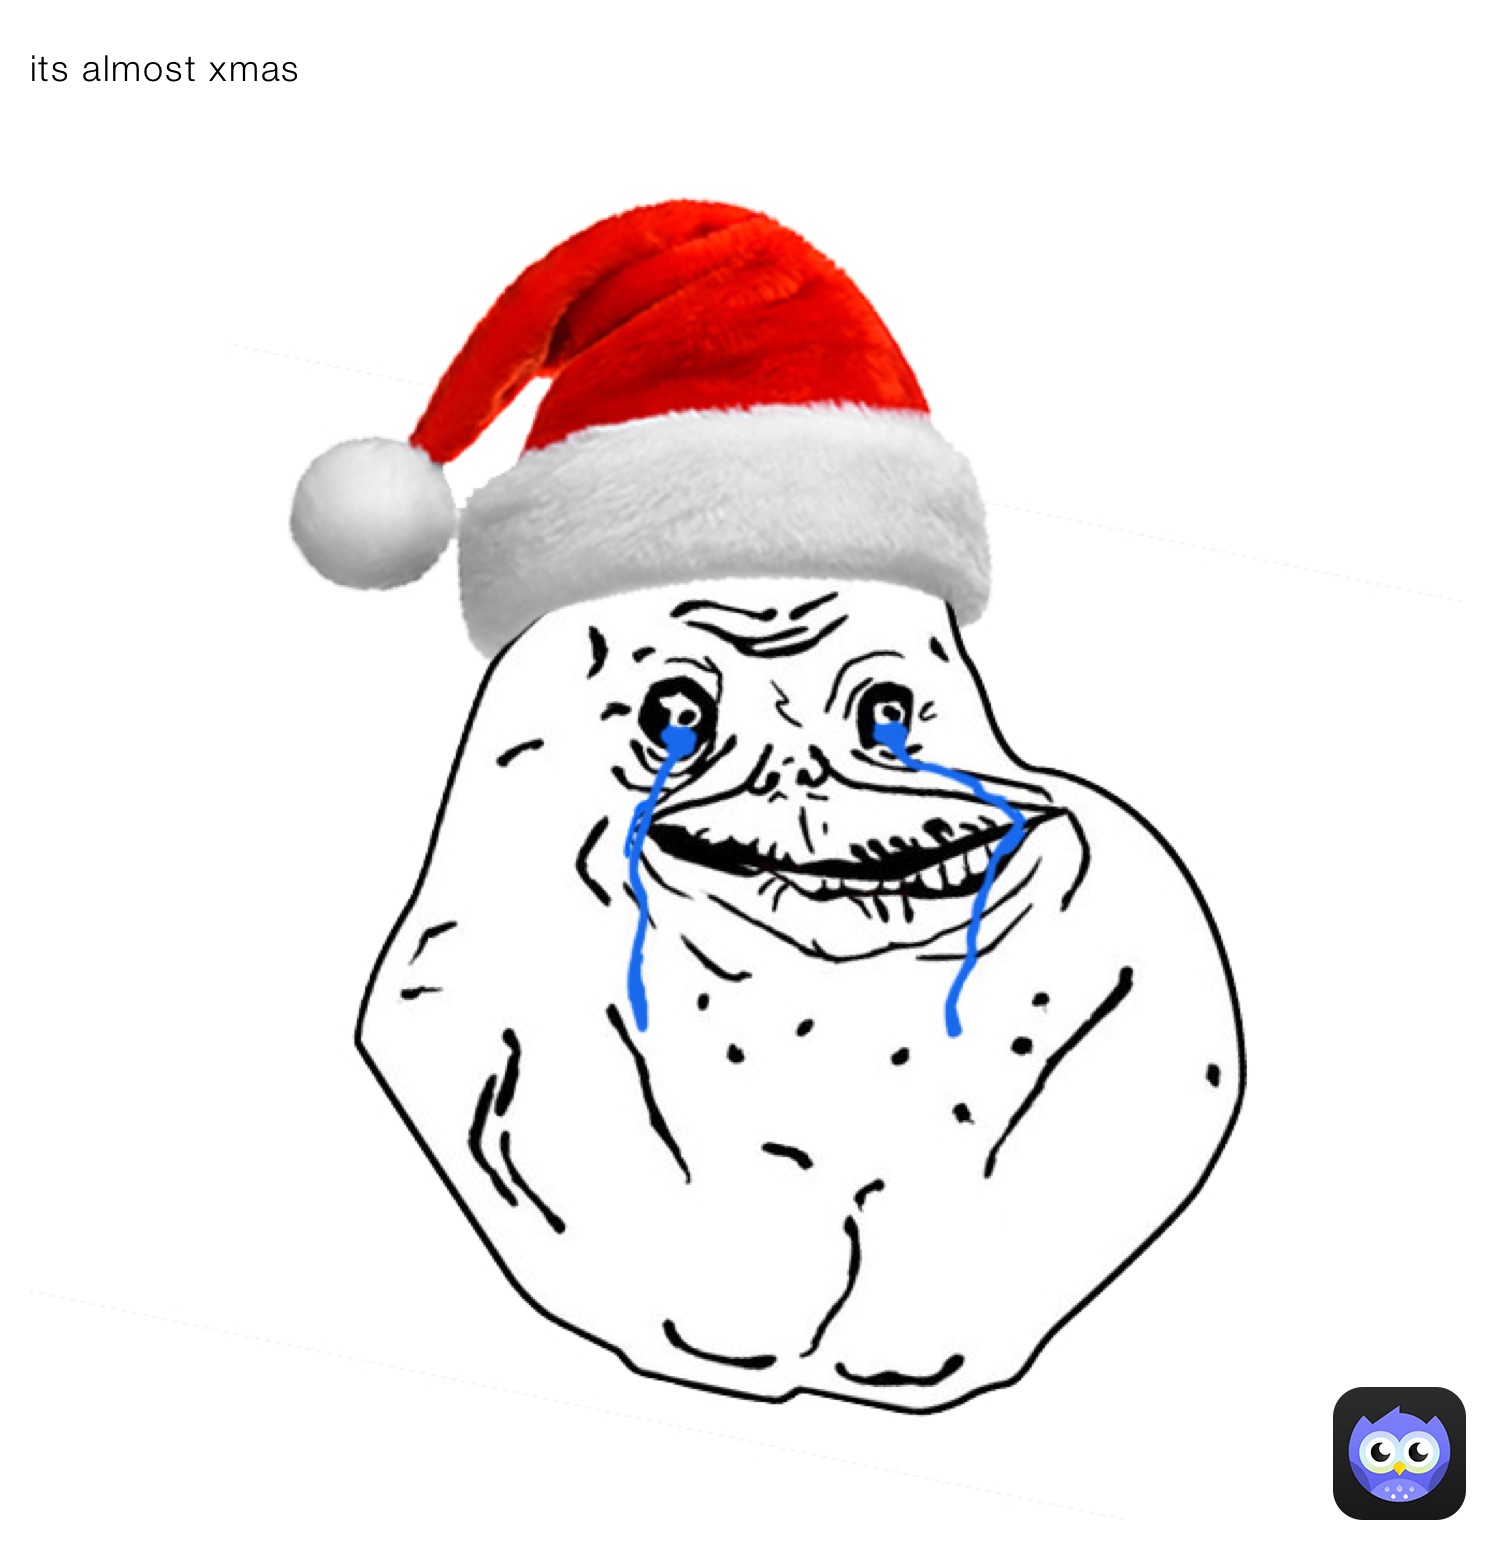 its almost xmas